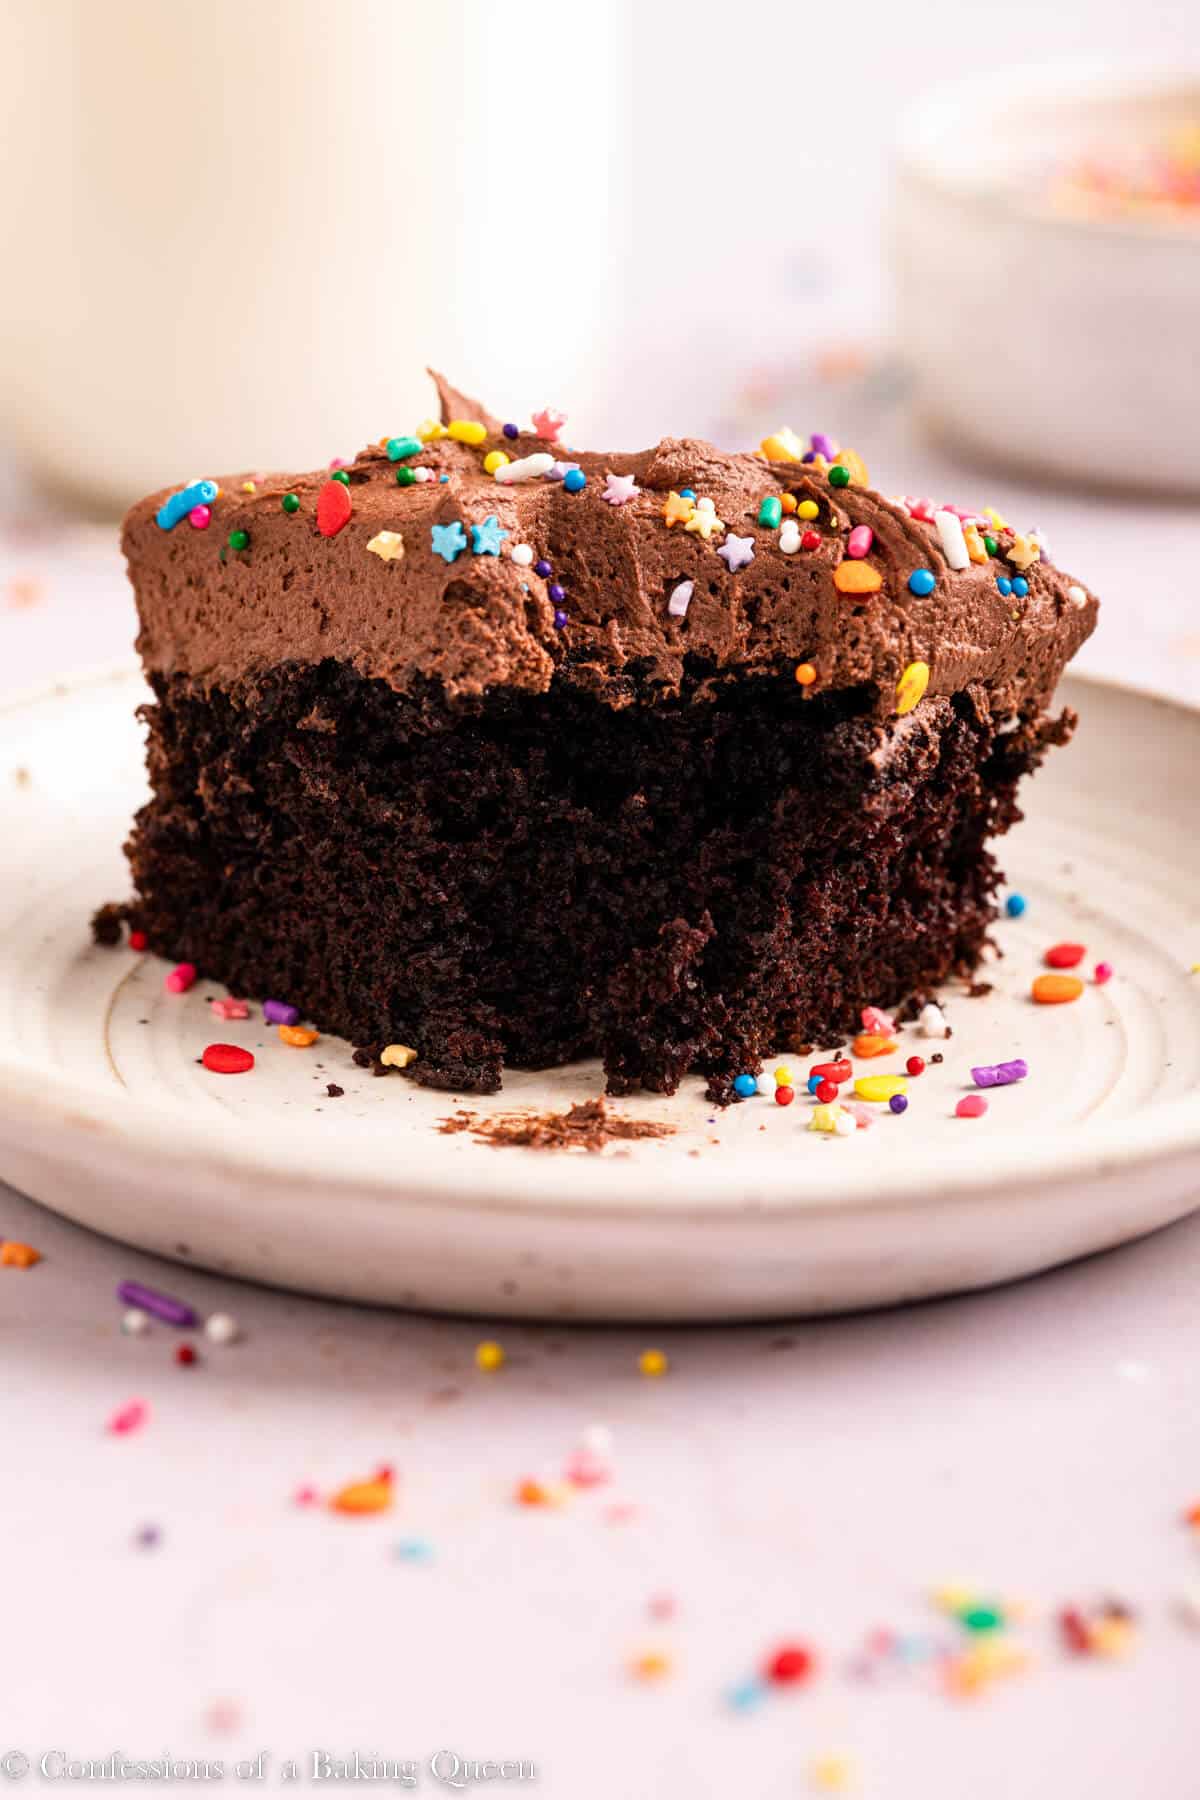 slice of chocolate cake with a bite taken out on a light surface with sprinkles scattered